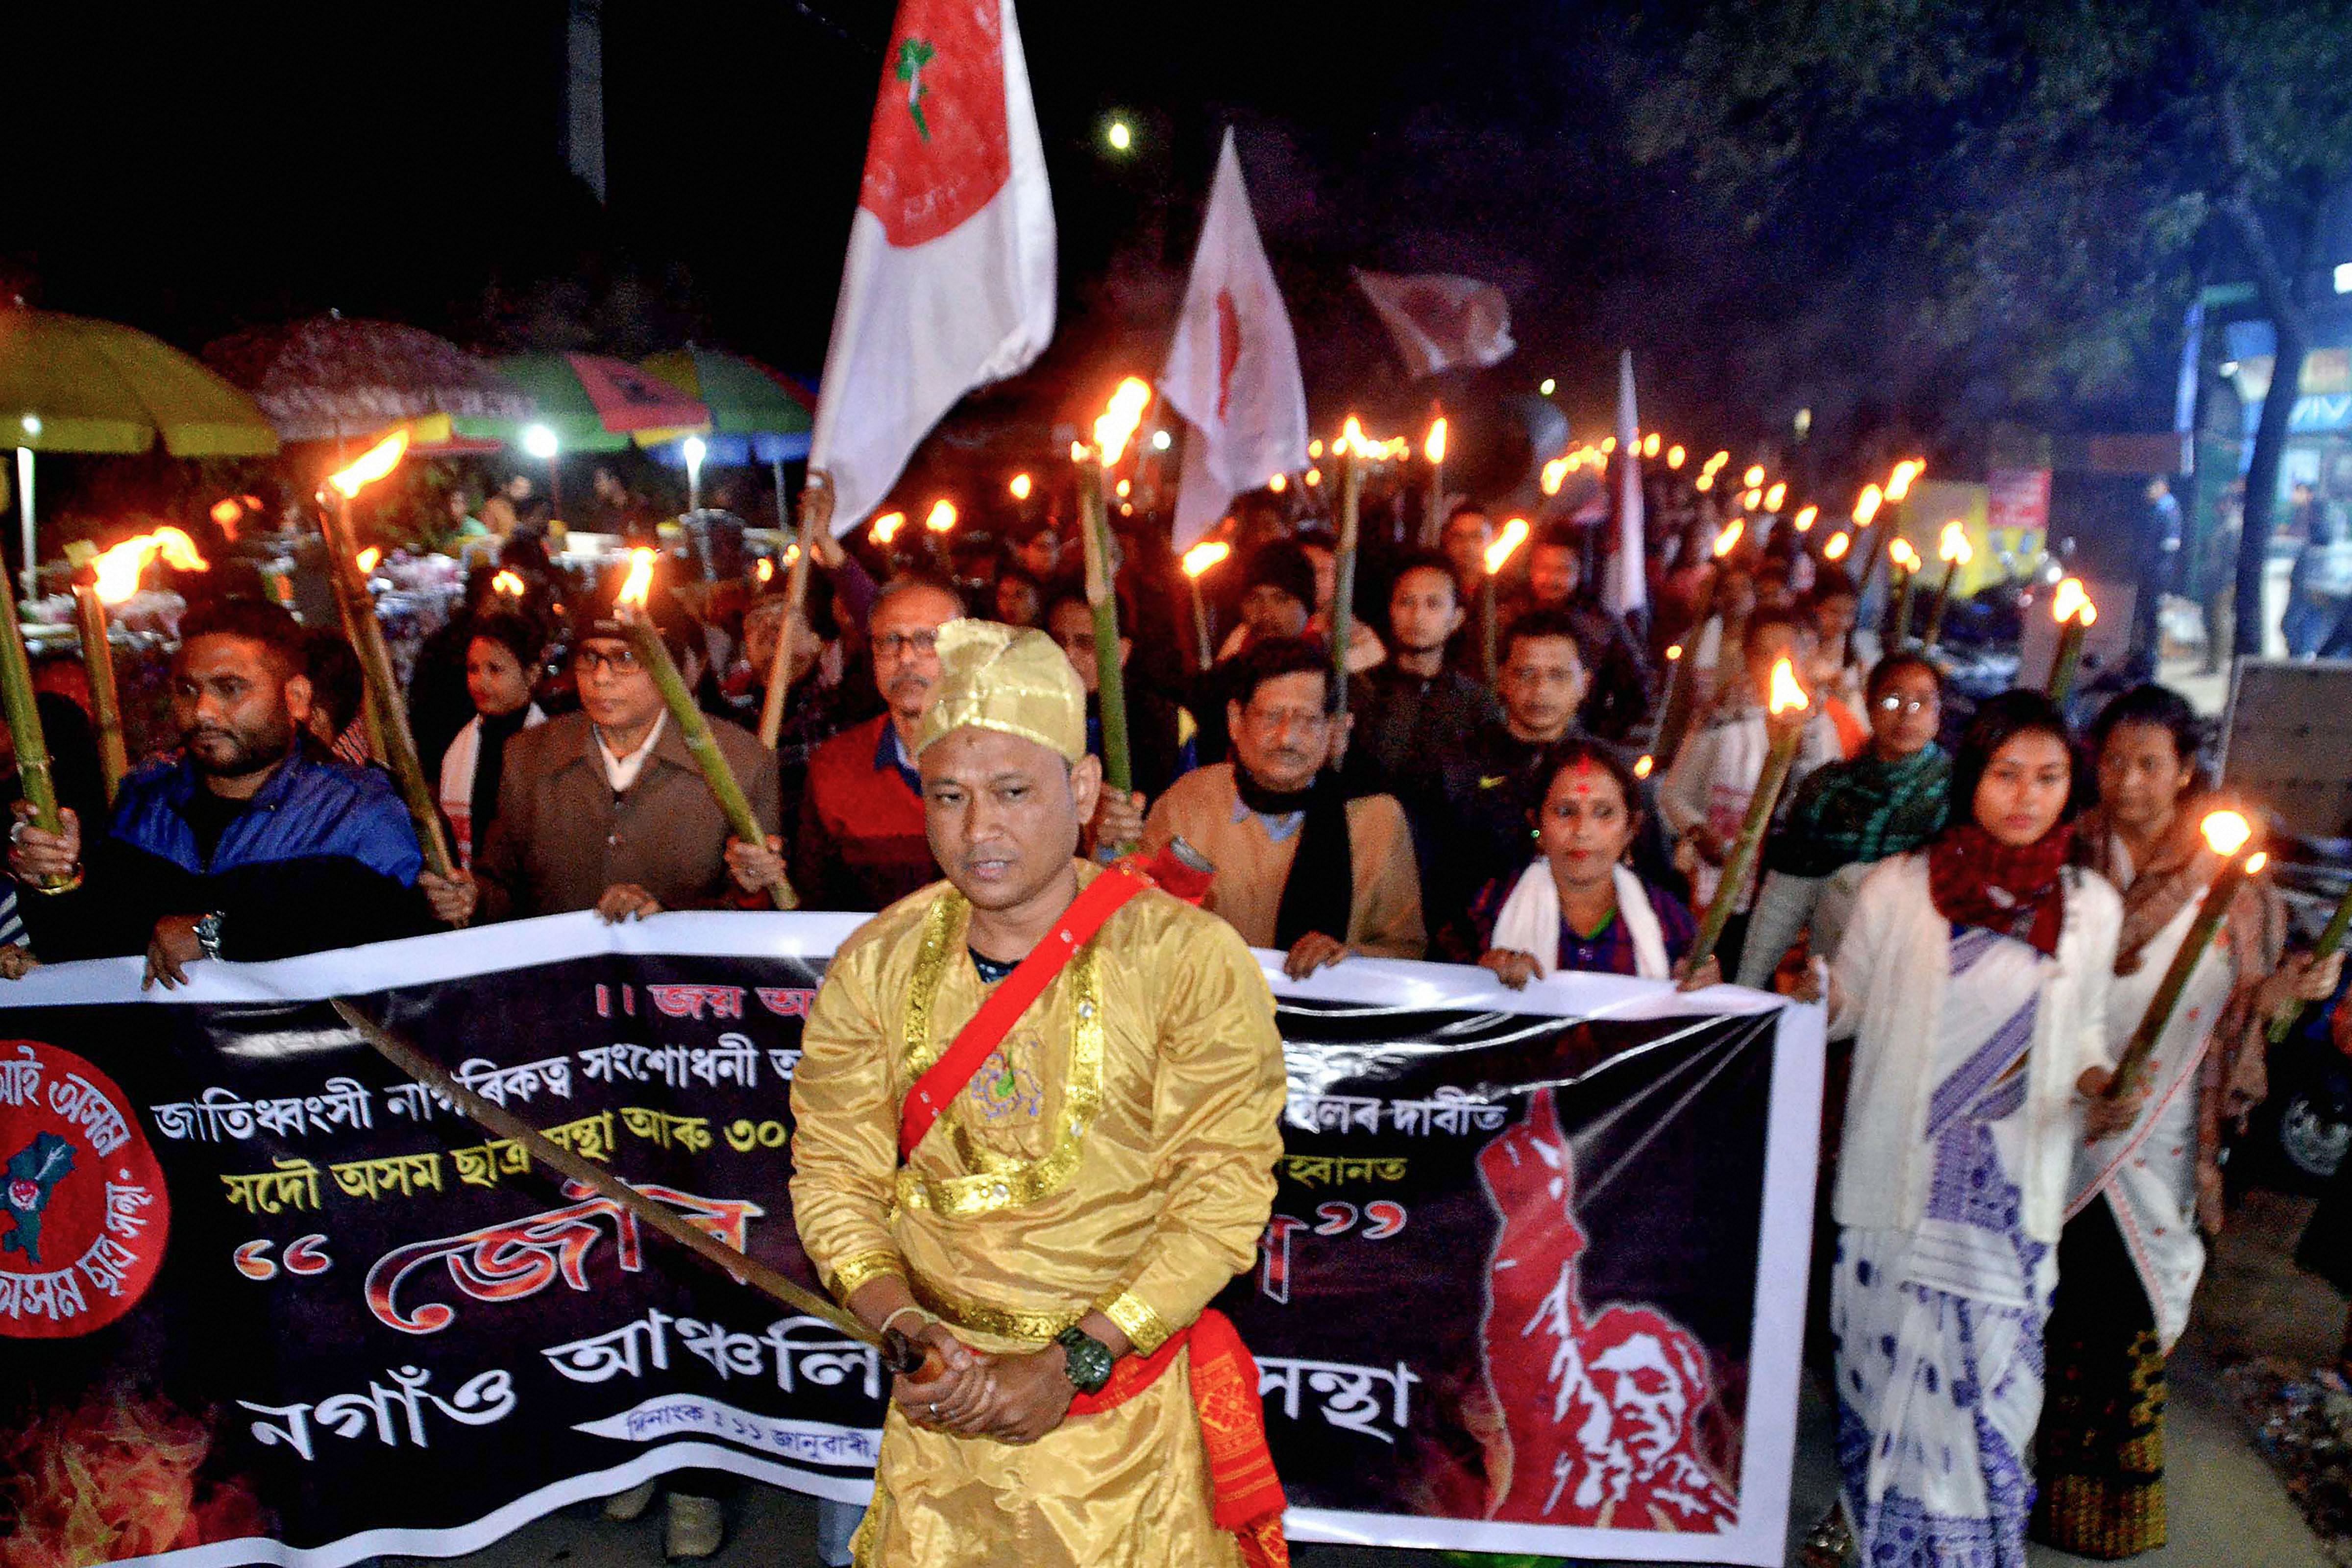  All Assam Students' Union (AASU) members along with senior citizens participate in a torch rally during a protest against Citizenship Law (CAA) in Nagaon.(PTI Photo)